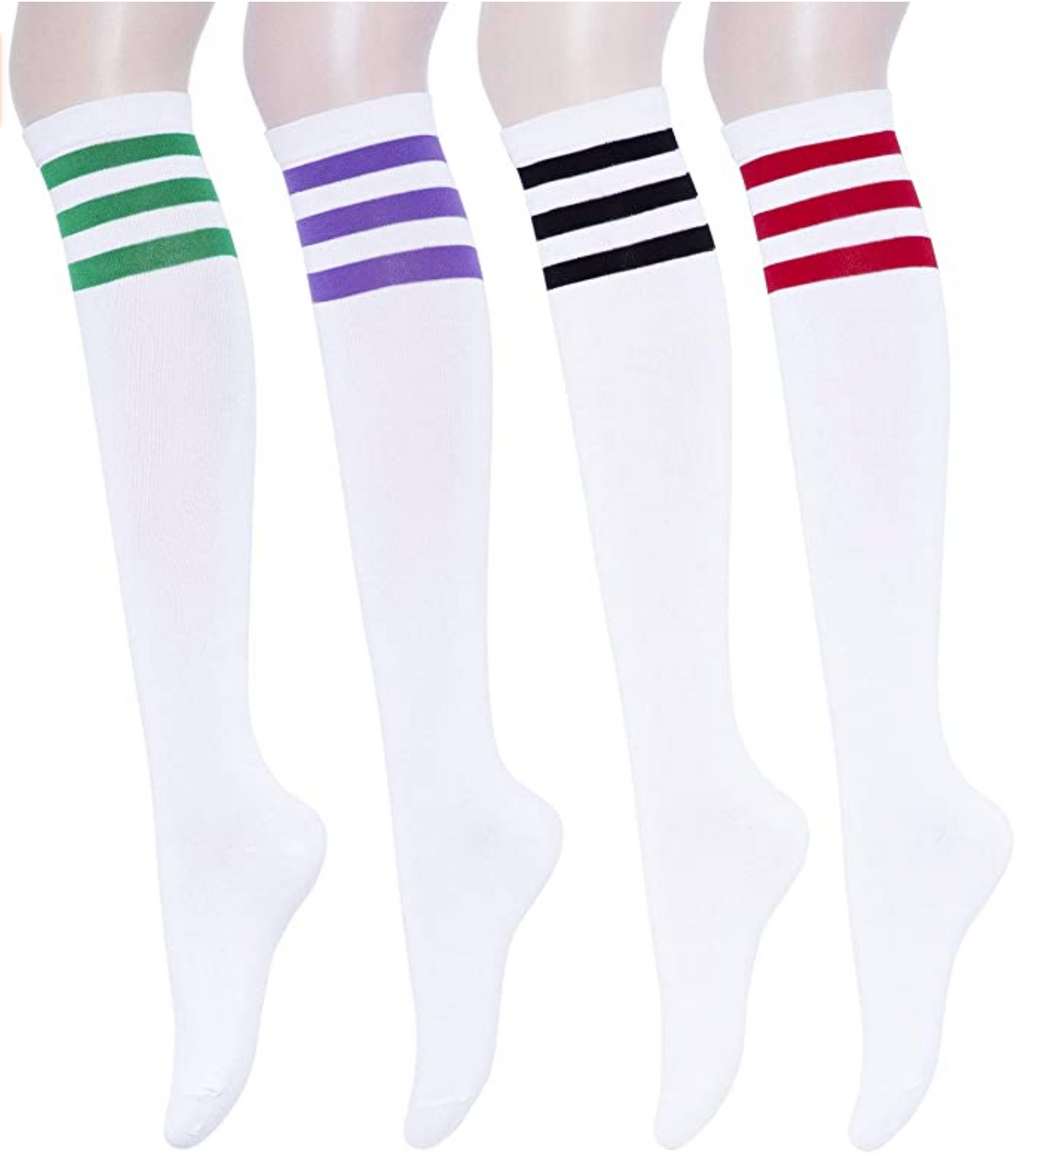 YEJIMONG Women's Striped Knee High Socks with Non-Slip Ribbed Cuffs - White (Red / Black / Purple / Green Stripes) (4 Pairs / Size 6-10 / Combed Cotton)